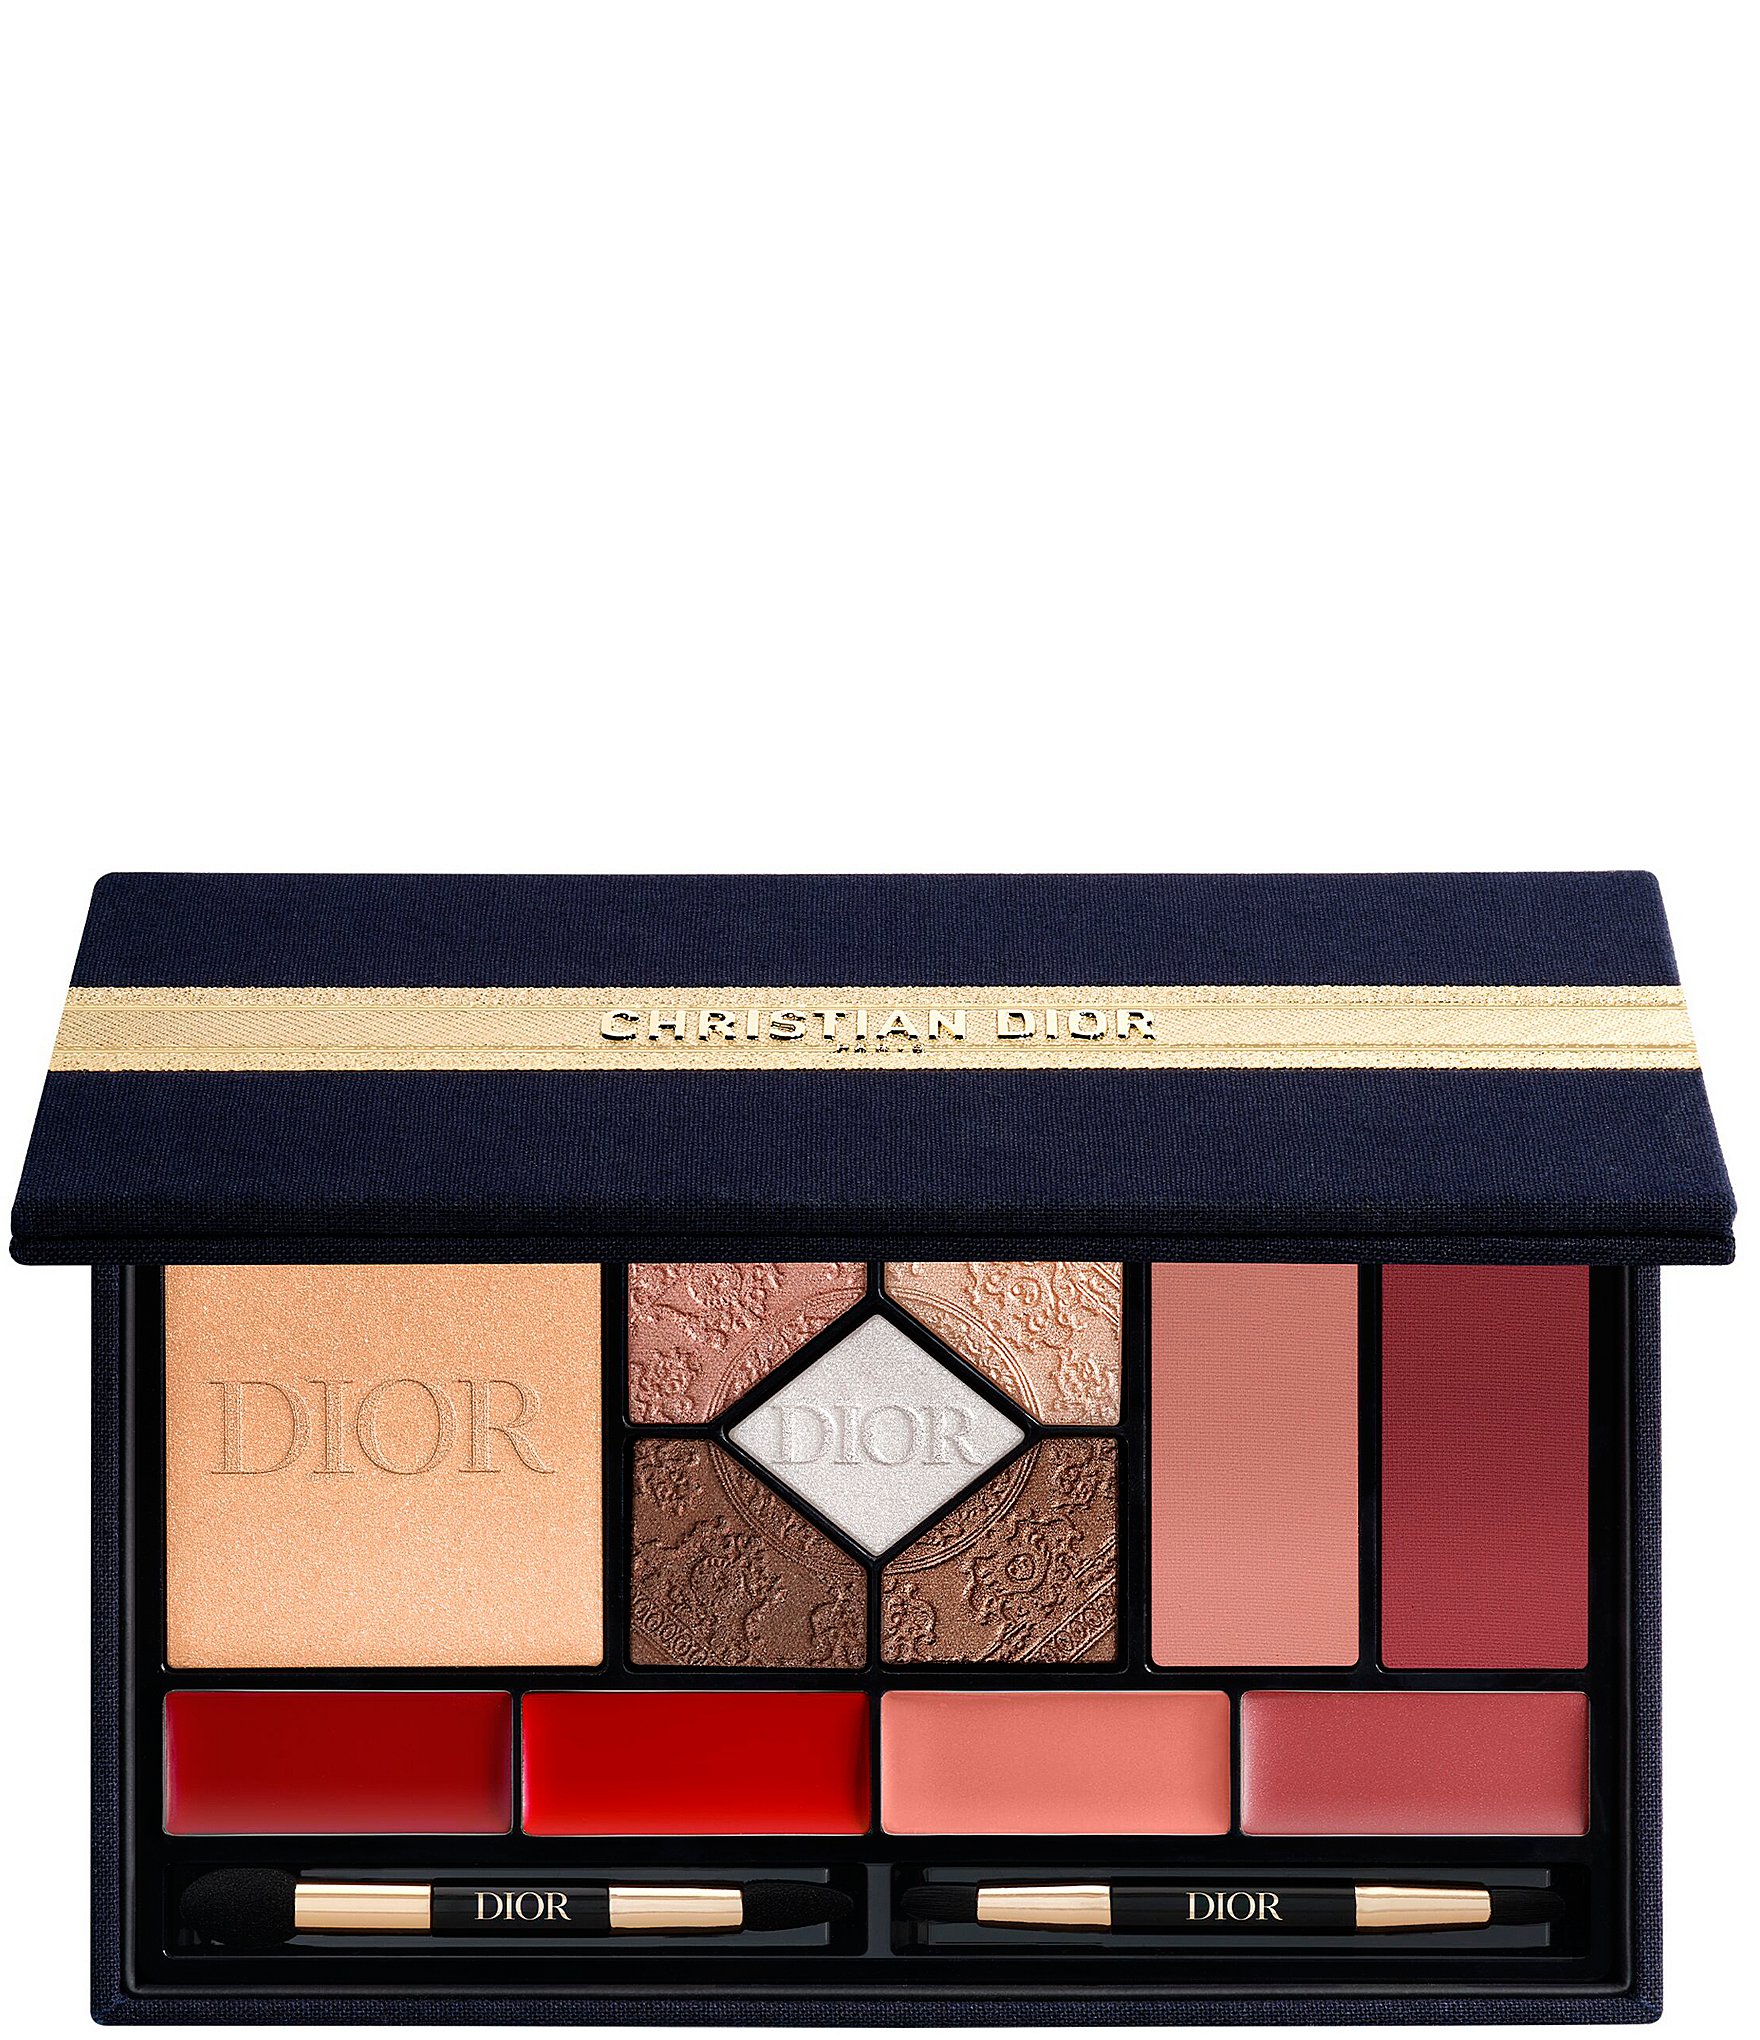 christian dior products